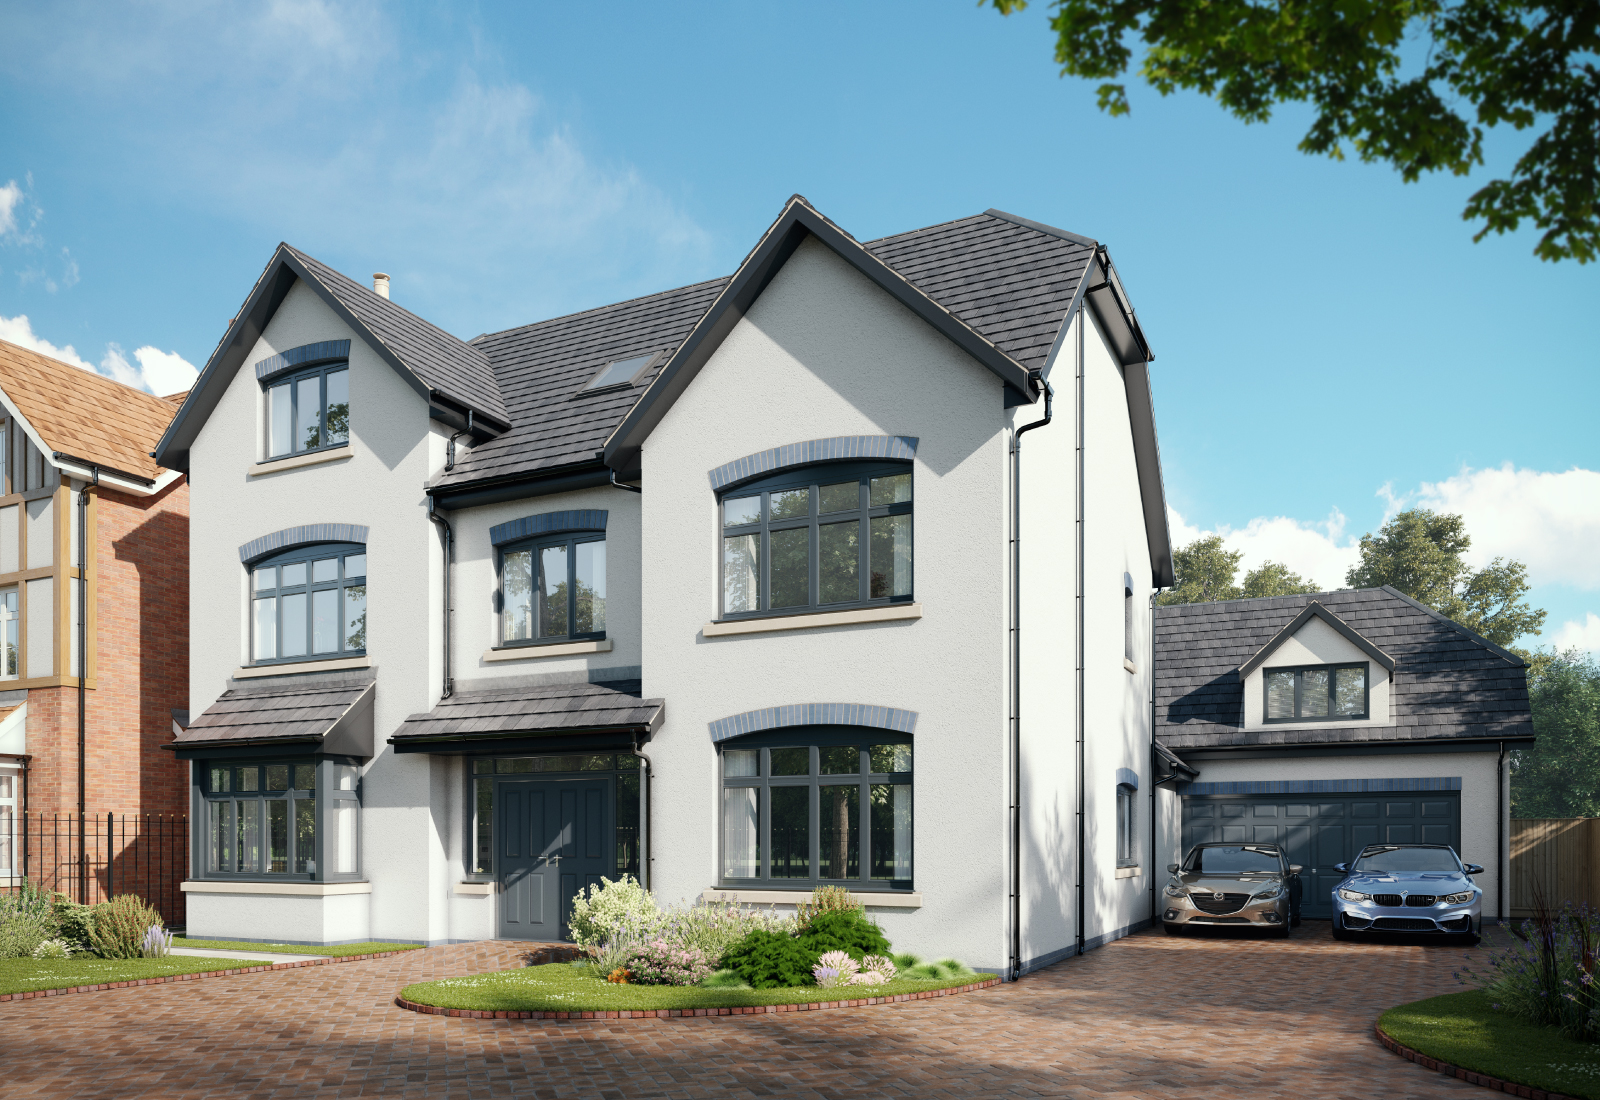 Jones Homes to unveil £1.7 million view home in Wilmslow